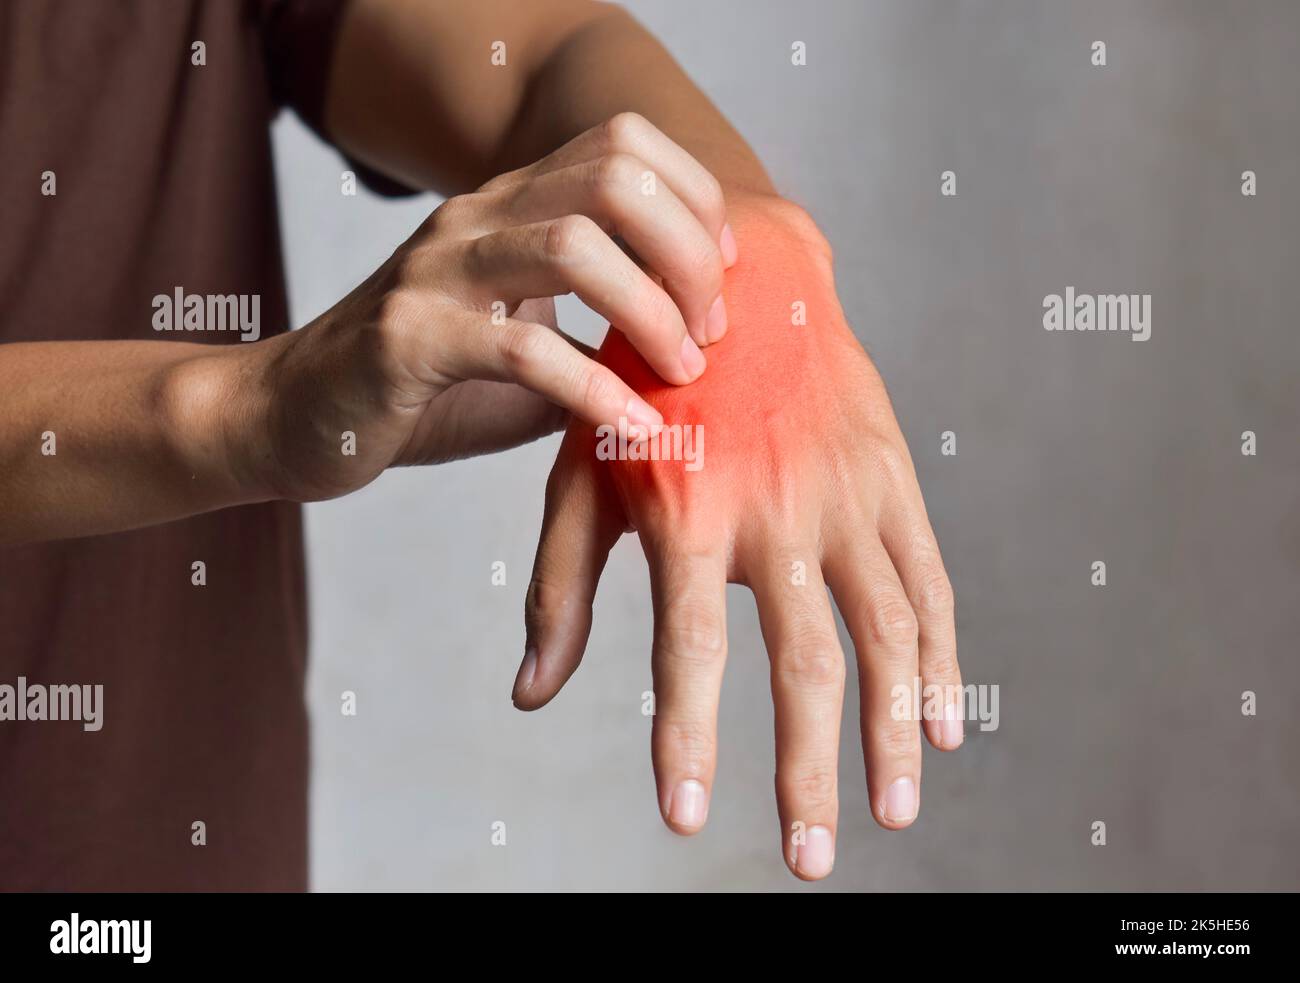 Asian young man scratching his hand. Concept of itchy skin diseases such as scabies, fungal infection, eczema, psoriasis, rash, allergy, etc. Stock Photo